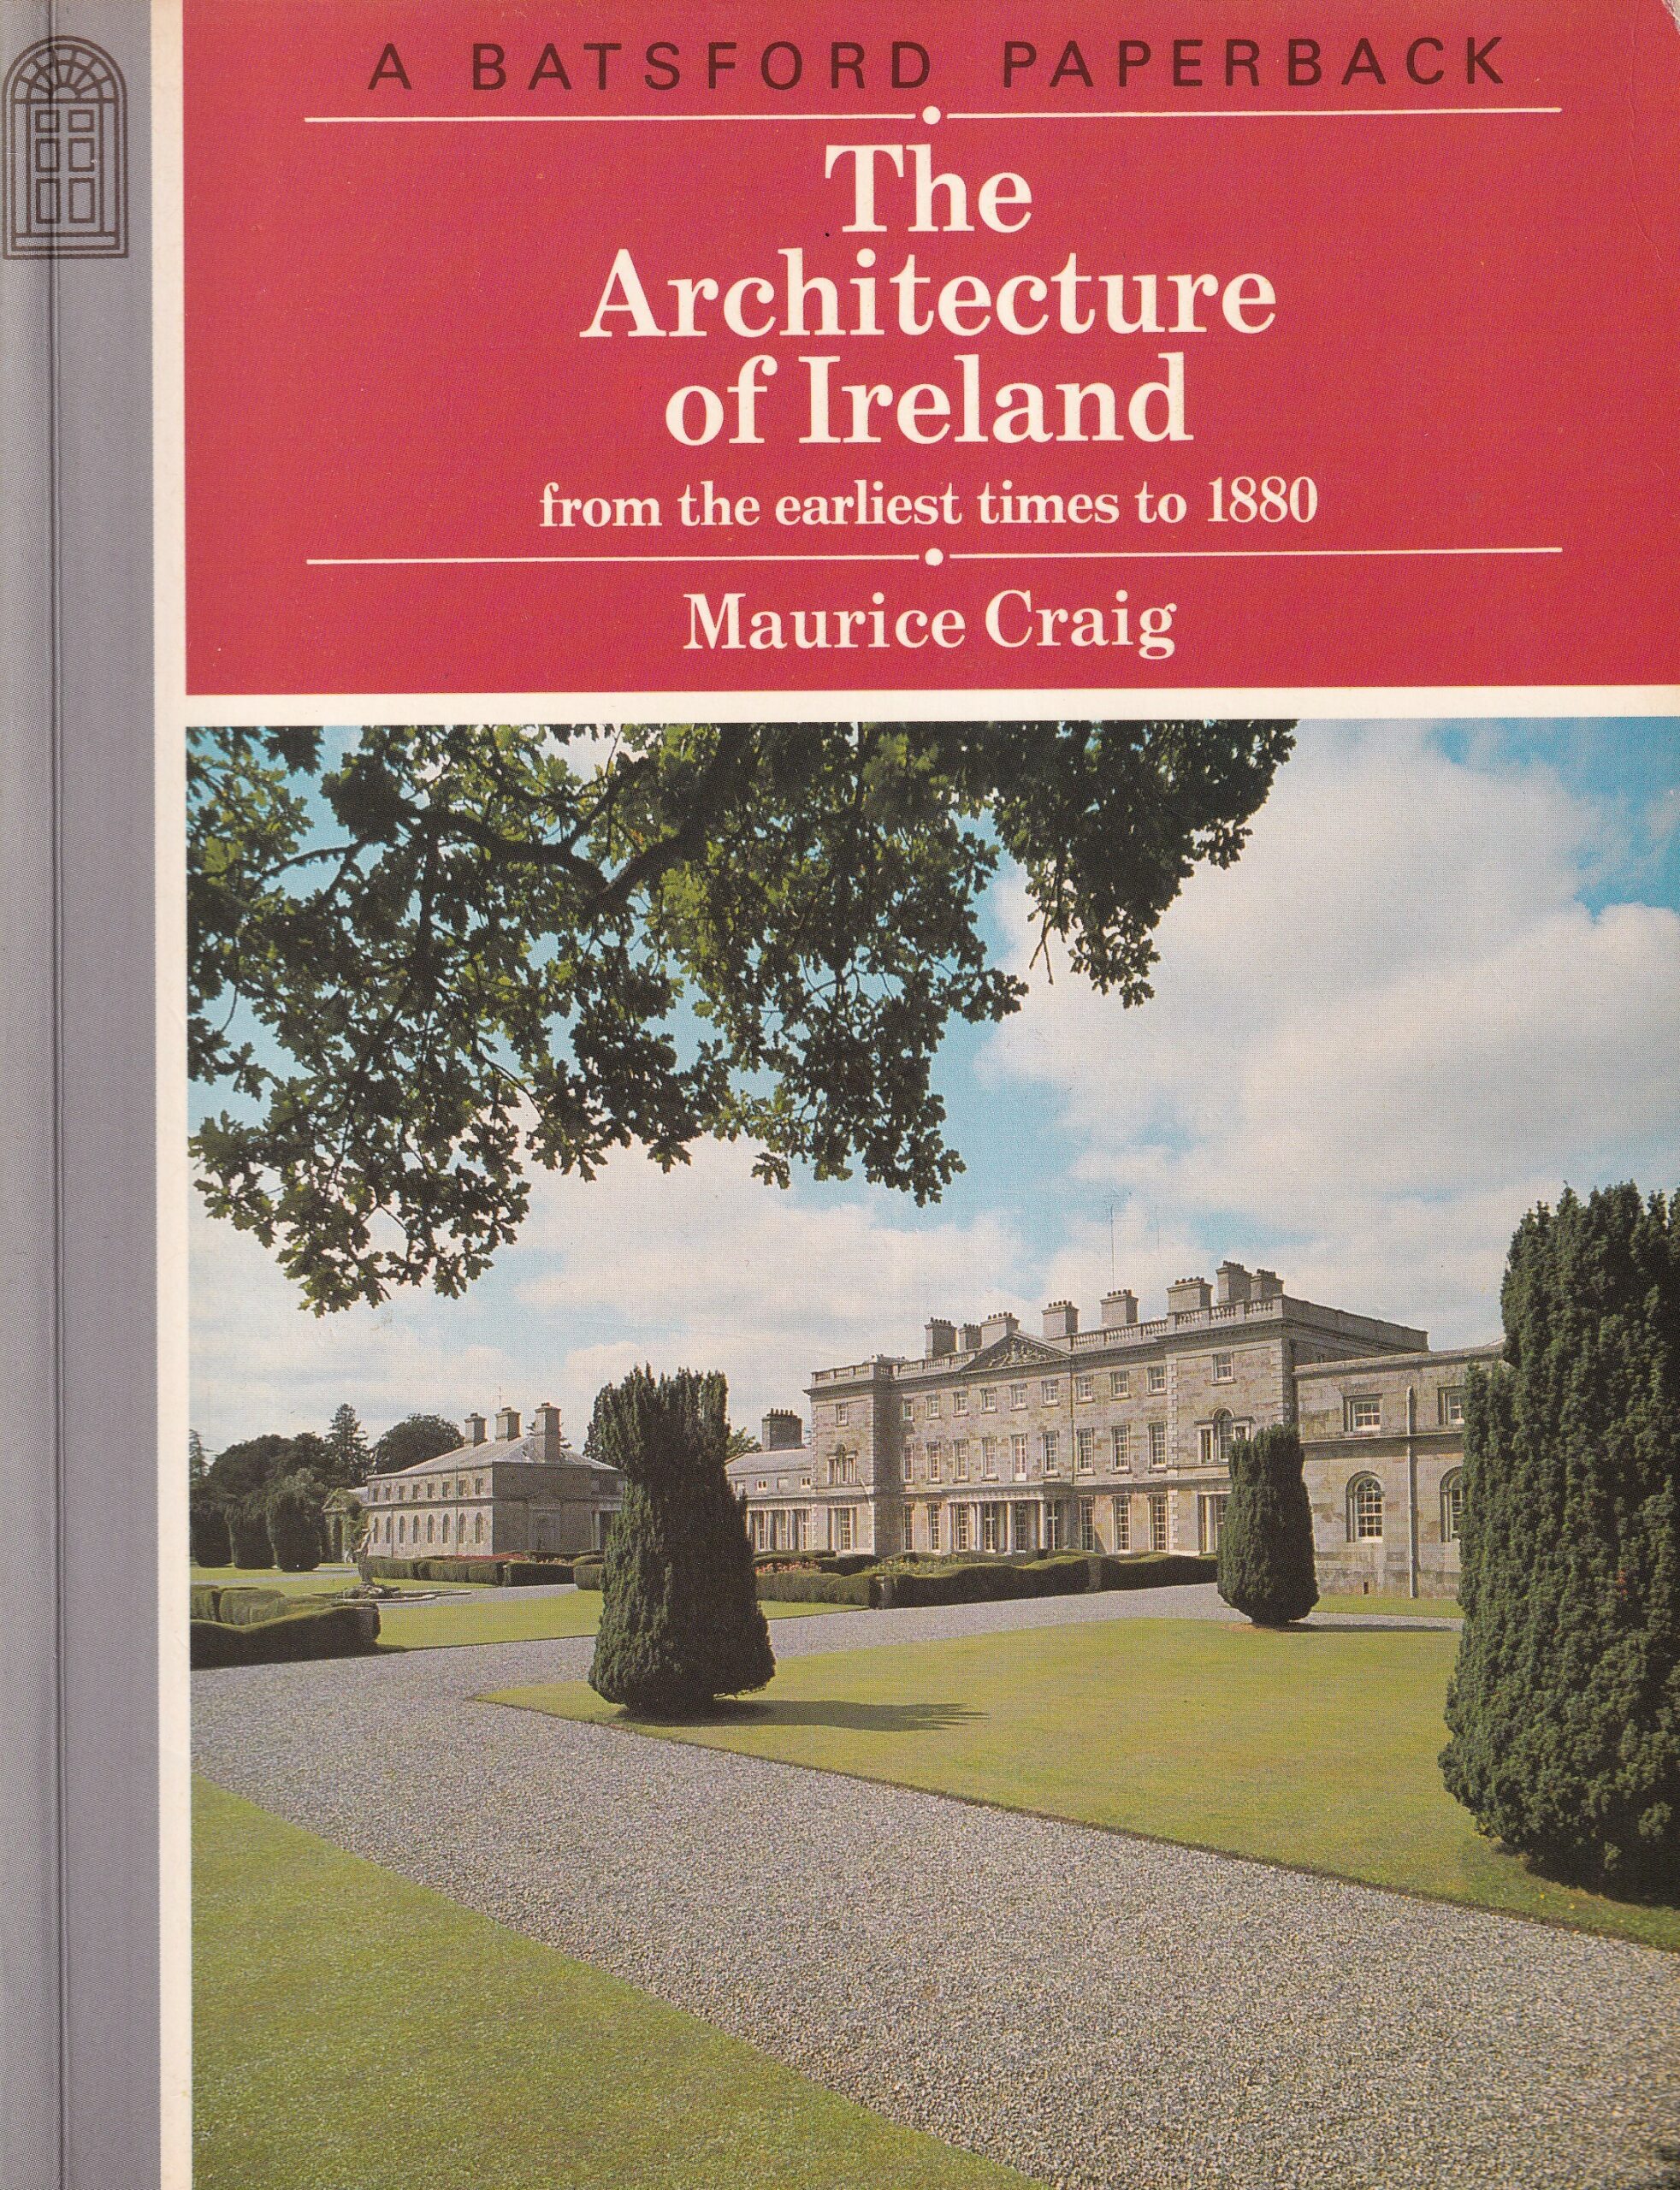 The Architecture of Ireland from the Earliest Times to 1880 | Maurice Craig | Charlie Byrne's